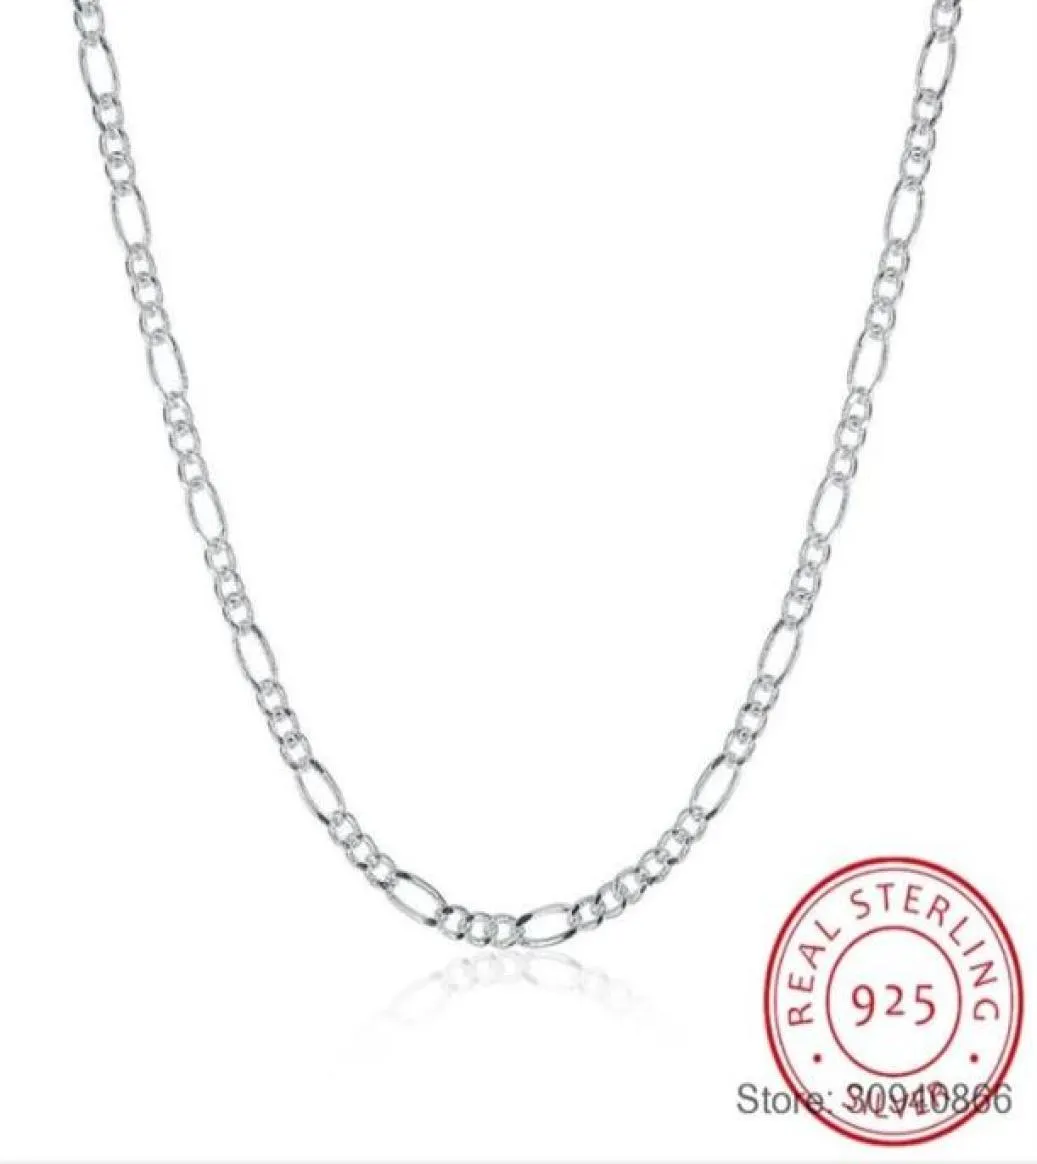 2021 SMTCAT 925 STERLING SILVER 2mm Figaro Chains Necklace Fine Jewelry R Chain Necklaces 16 24 249U2078438